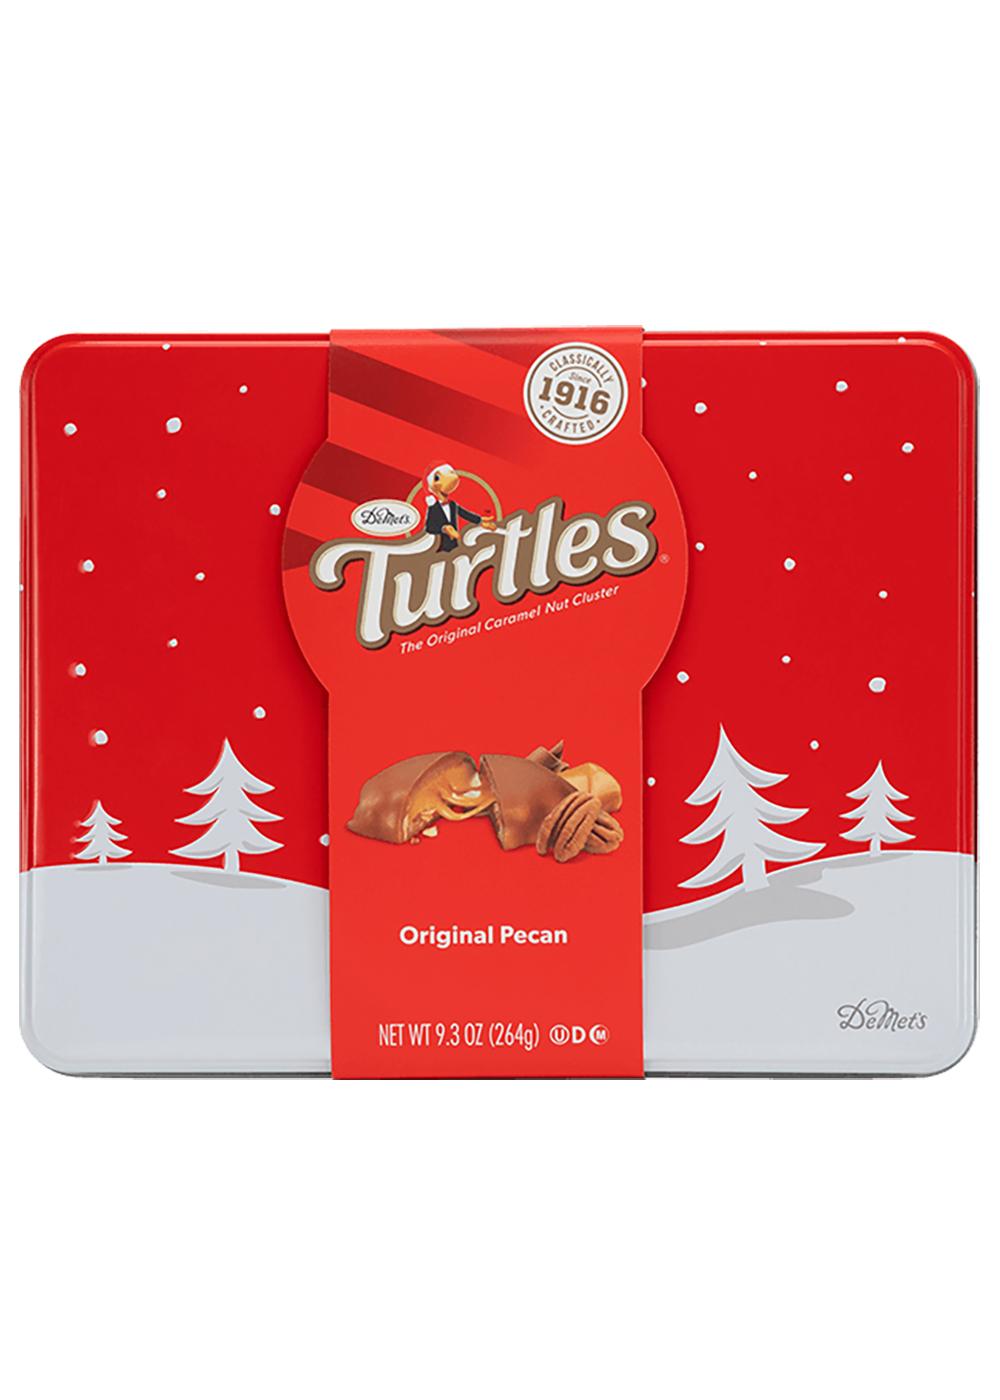 Turtles Original Chocolate Caramel Nut Clusters Holiday Candy Gift Box; image 1 of 2